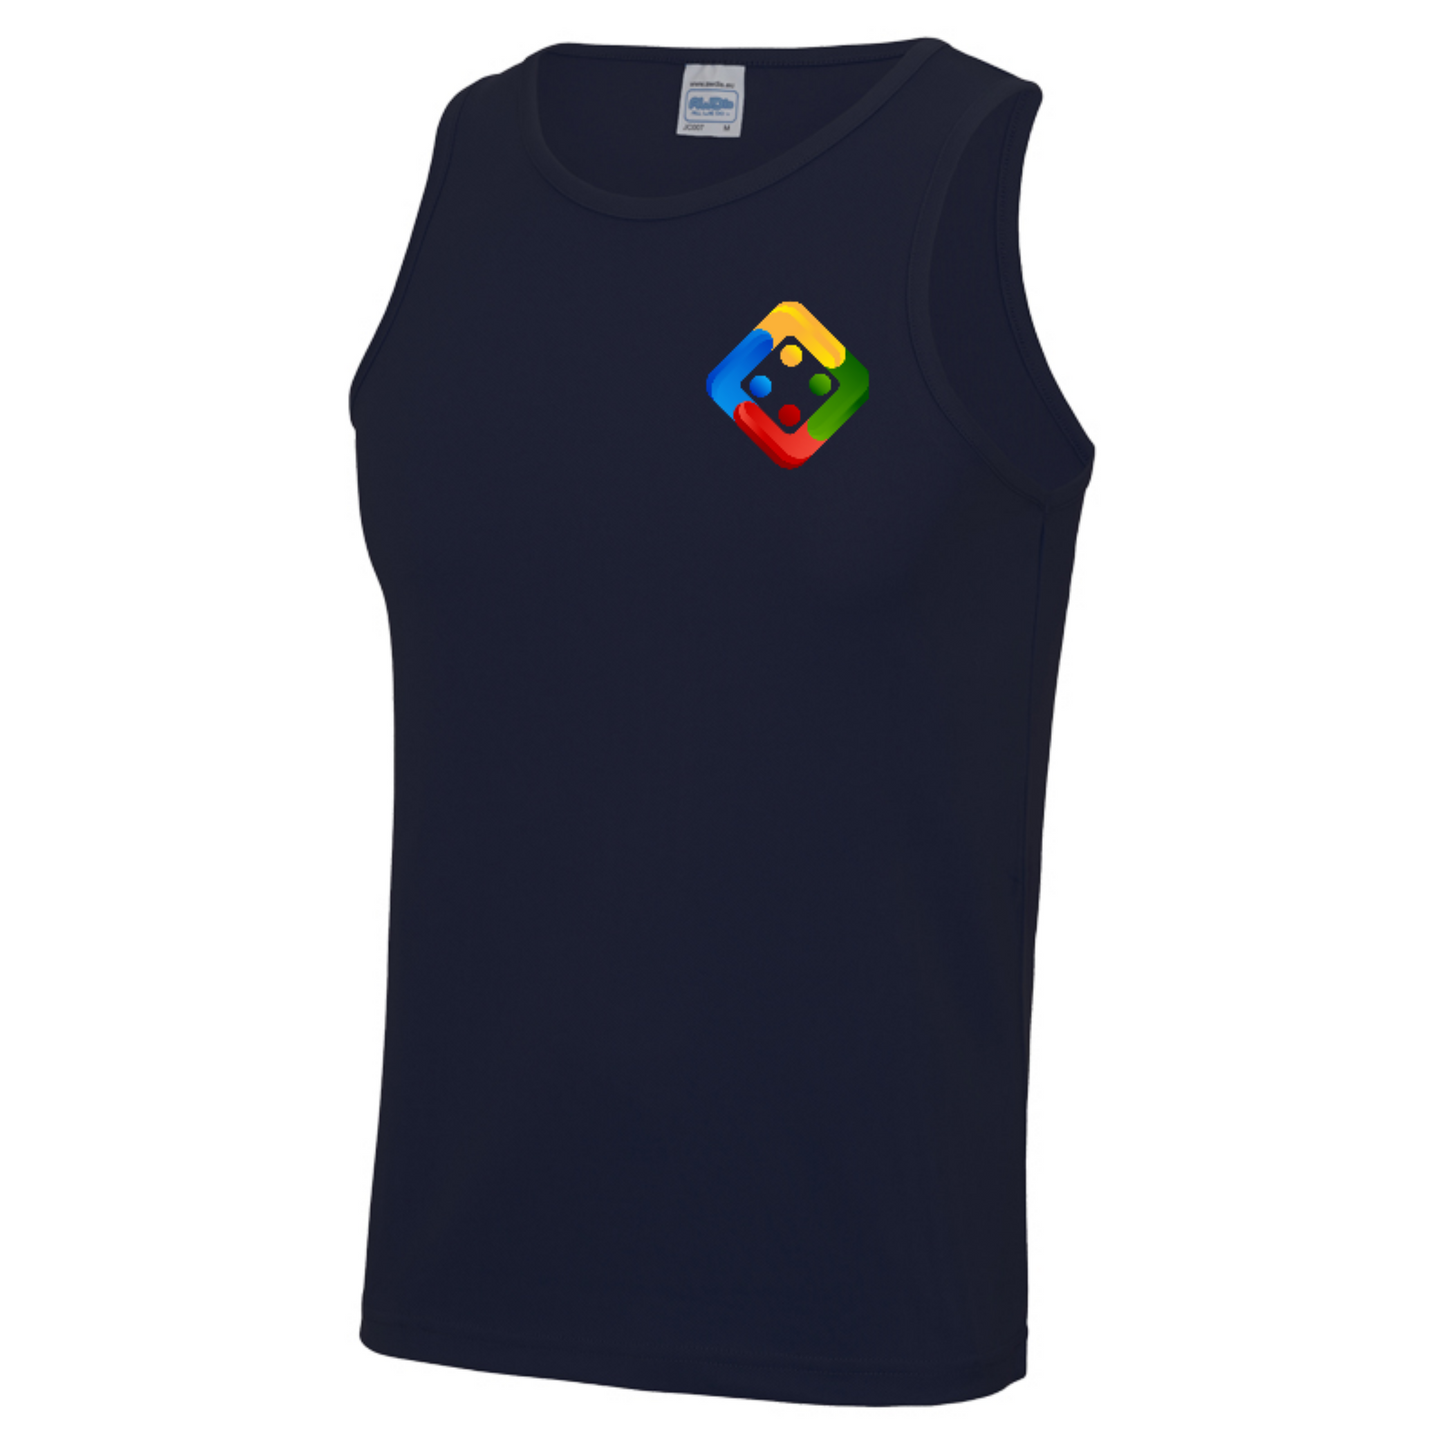 Men's cool sports vest in dark colours with small printed Uckers emblem. Available in 9 colours.